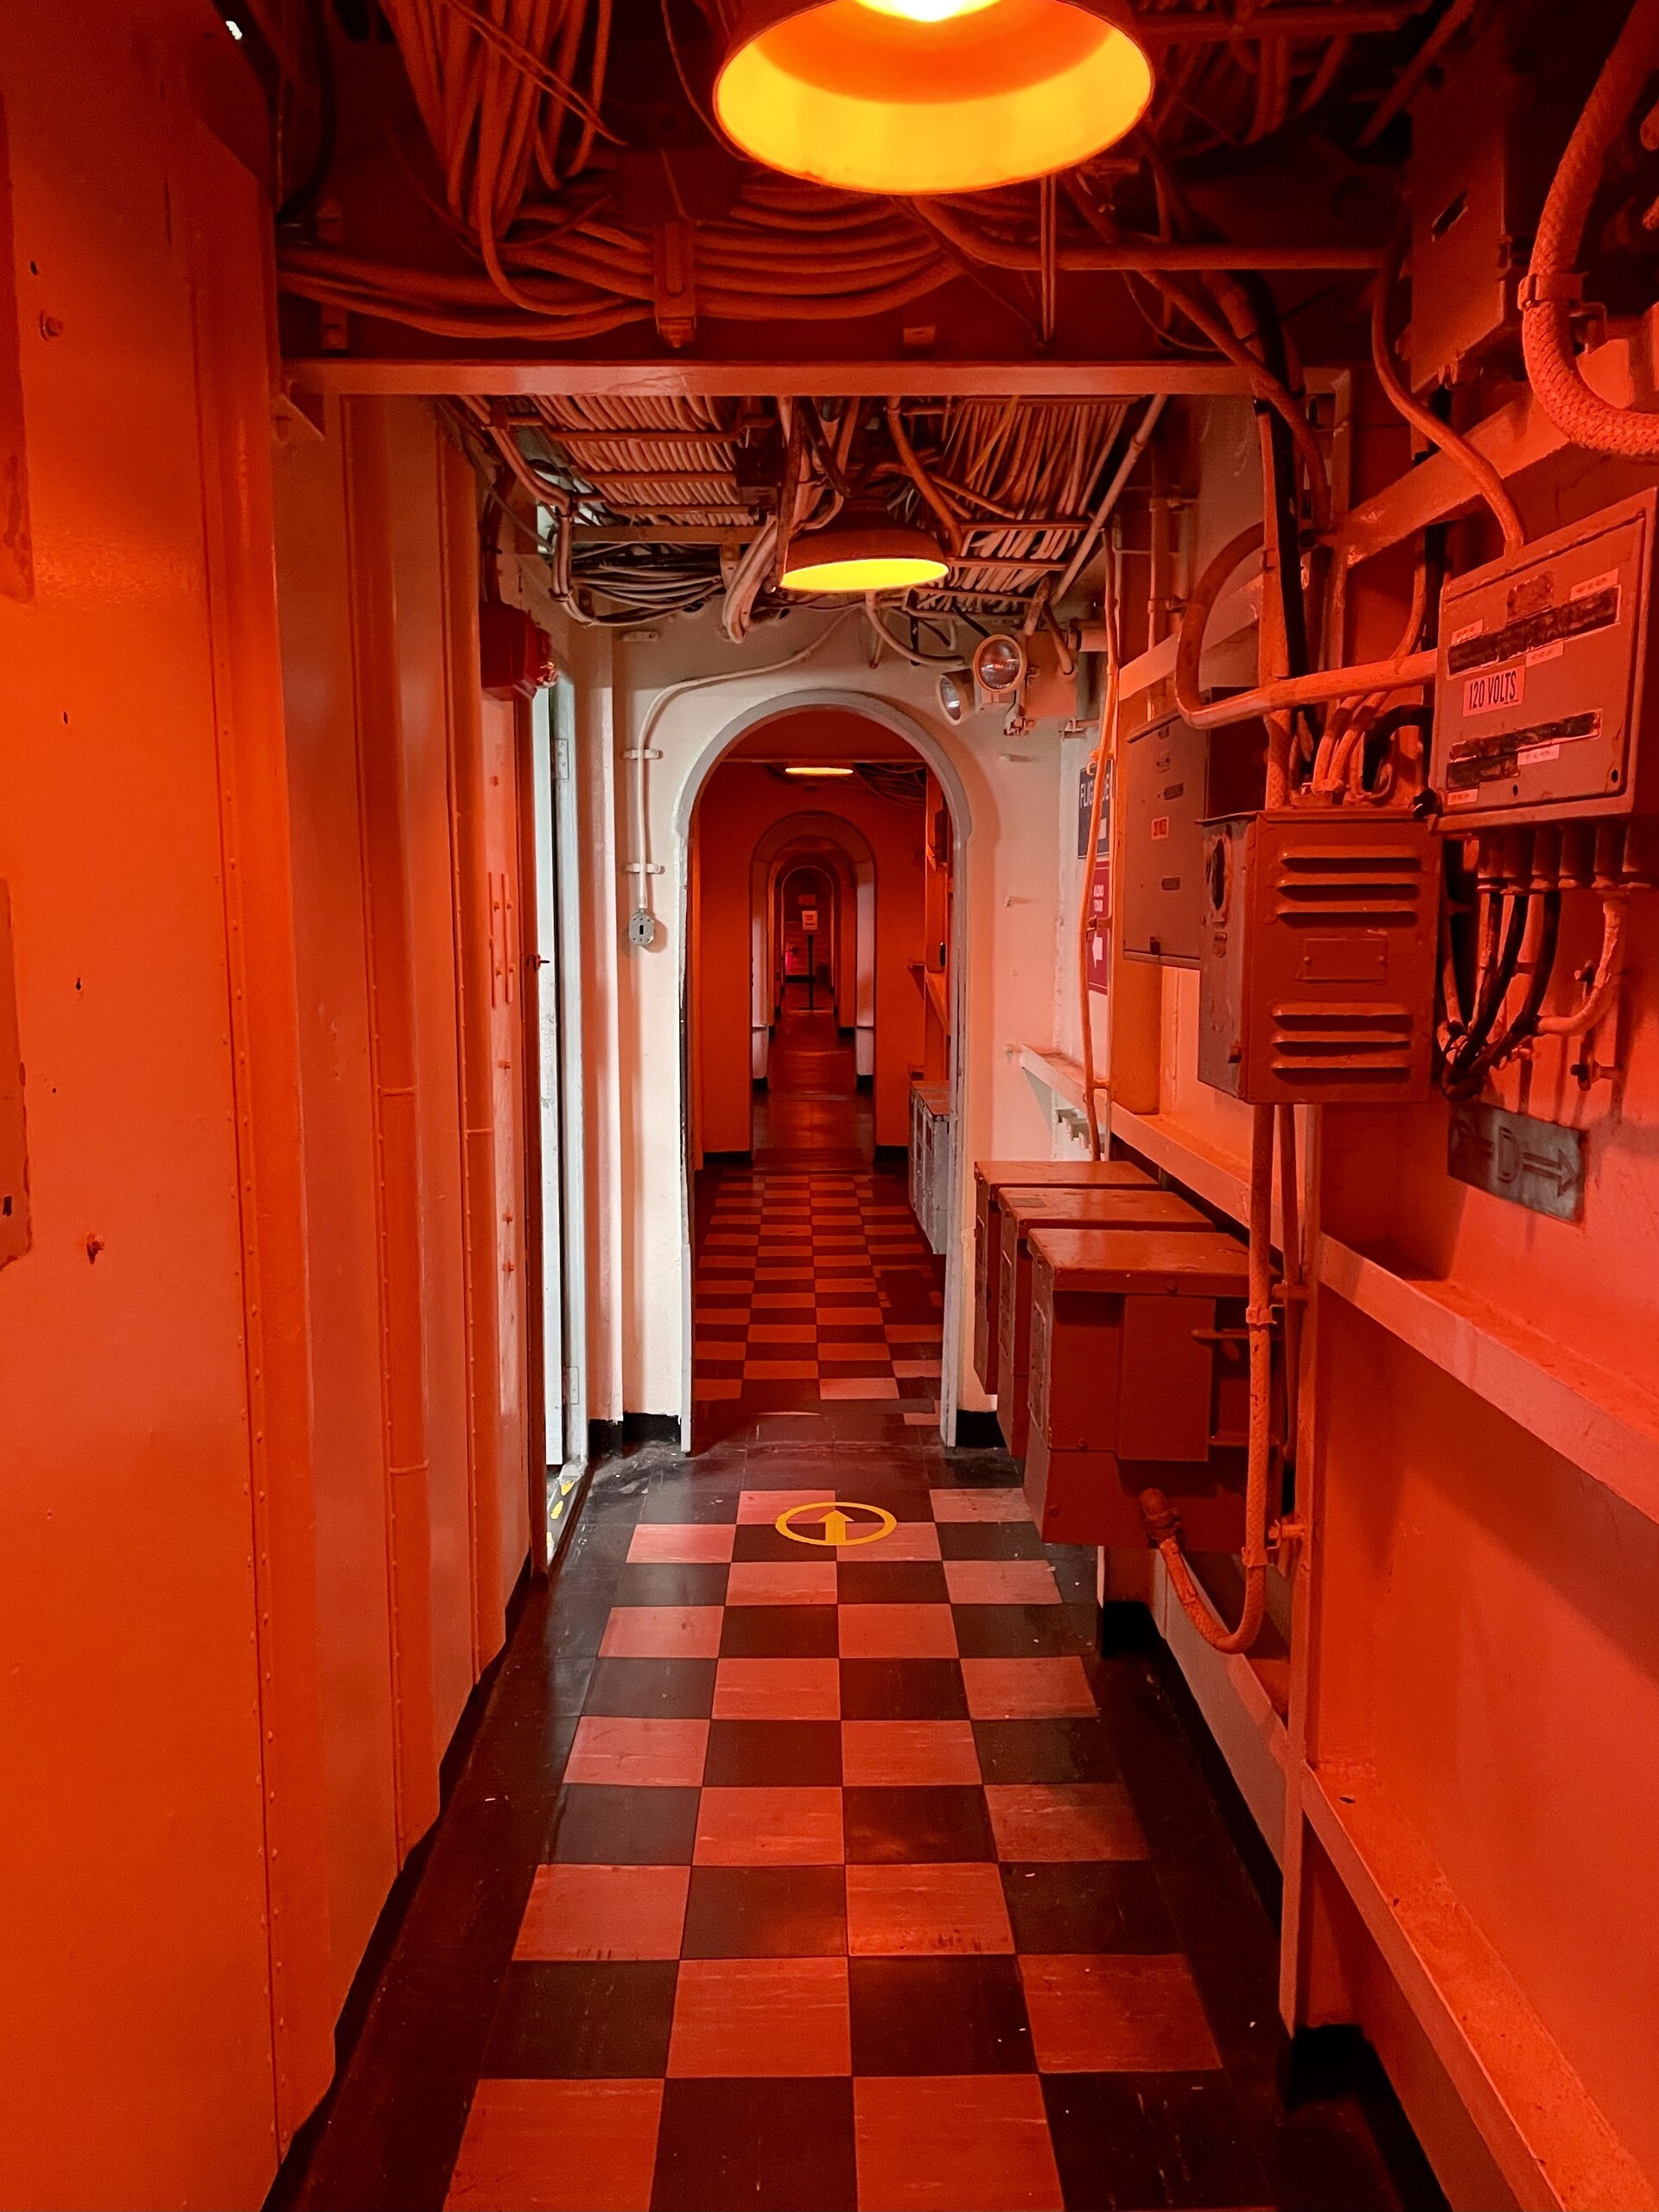 A long hallway on board the USS Yorktown, with red lighting overhead and a checkboard floor and lots of wires running overhead.